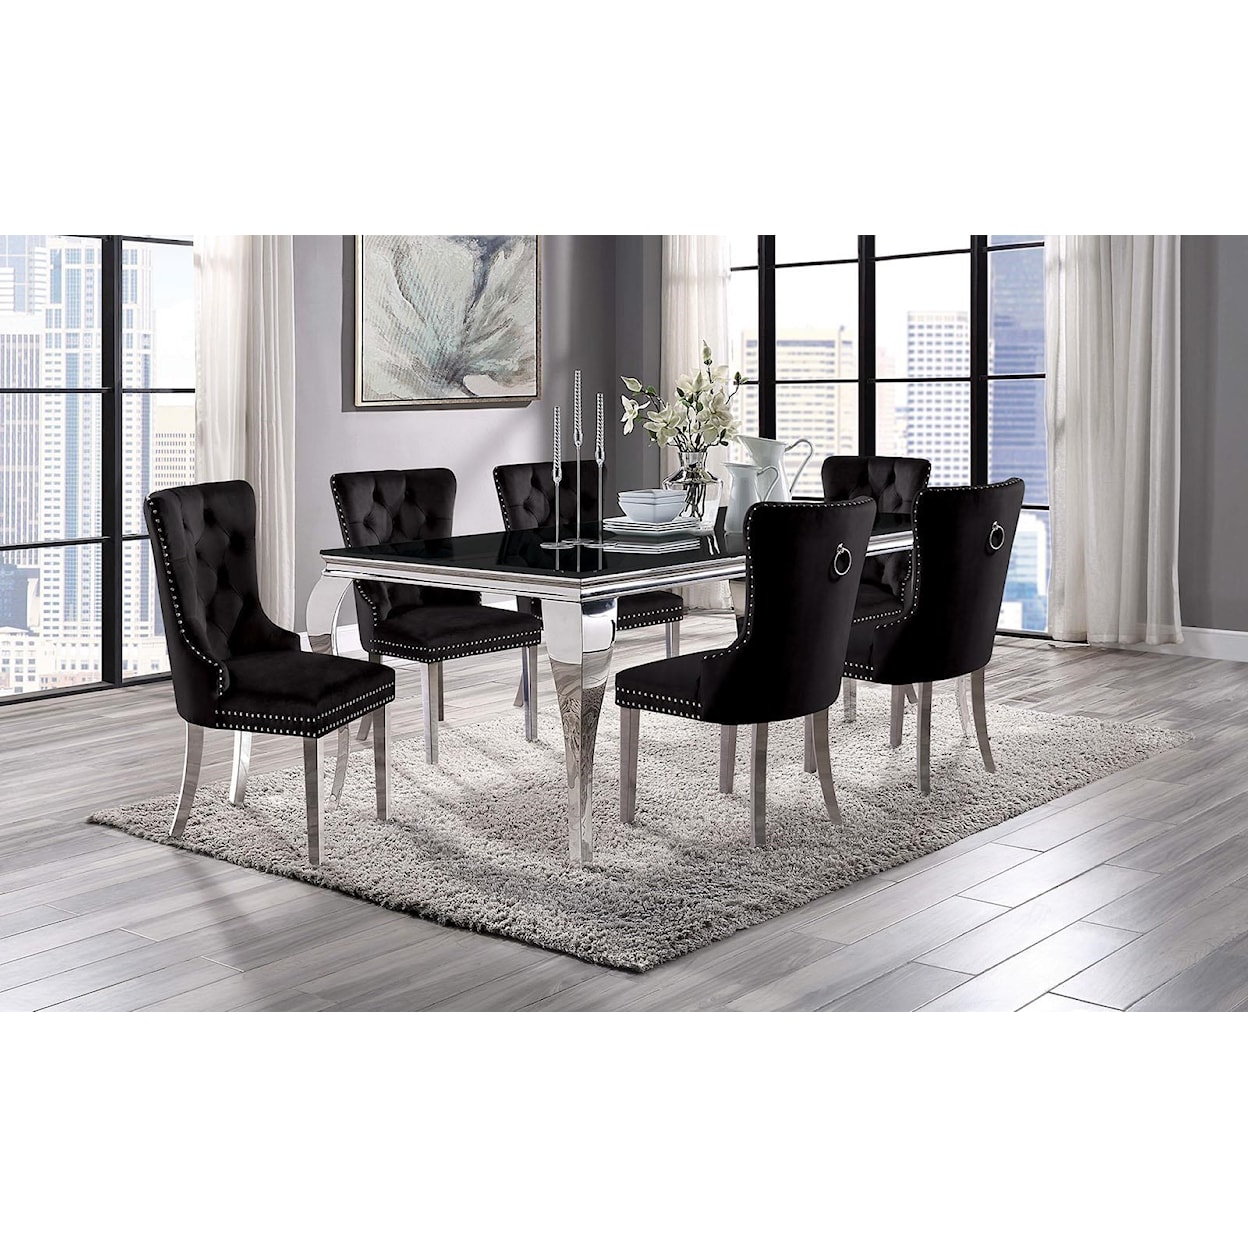 Furniture of America - FOA Neuveville 7 Pc. Dining Table Set, Black Chairs